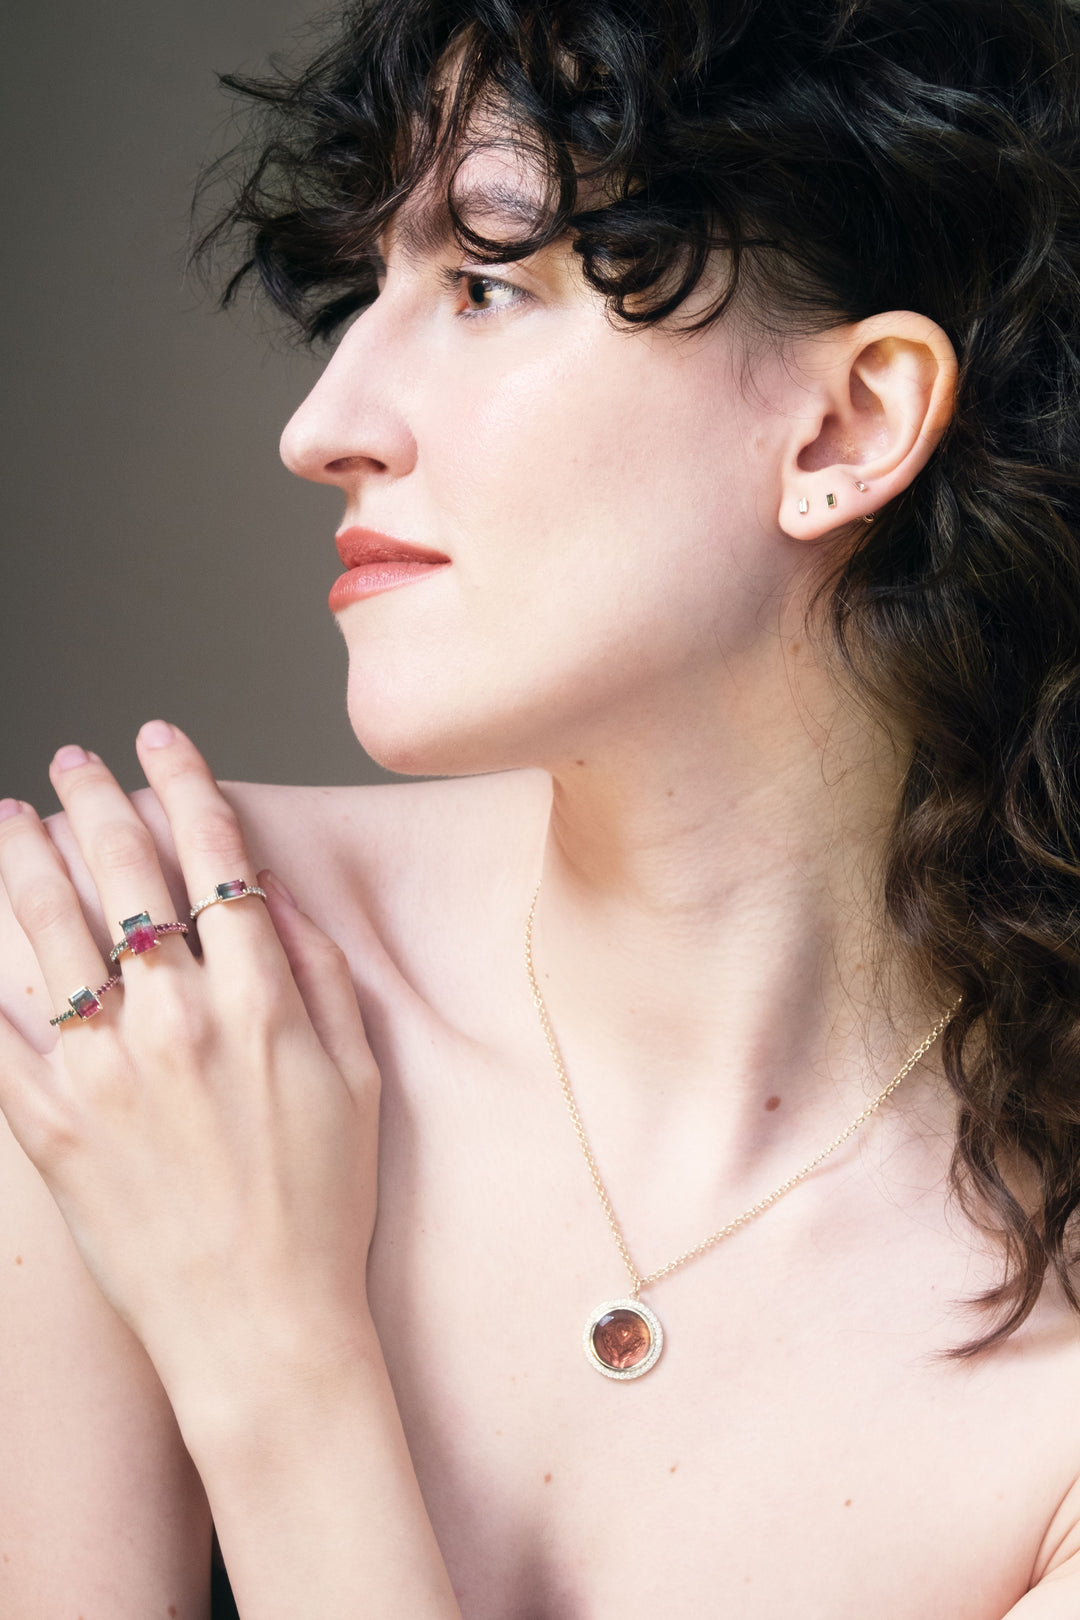 woman with curly dark hair wearing new rings and a pendant